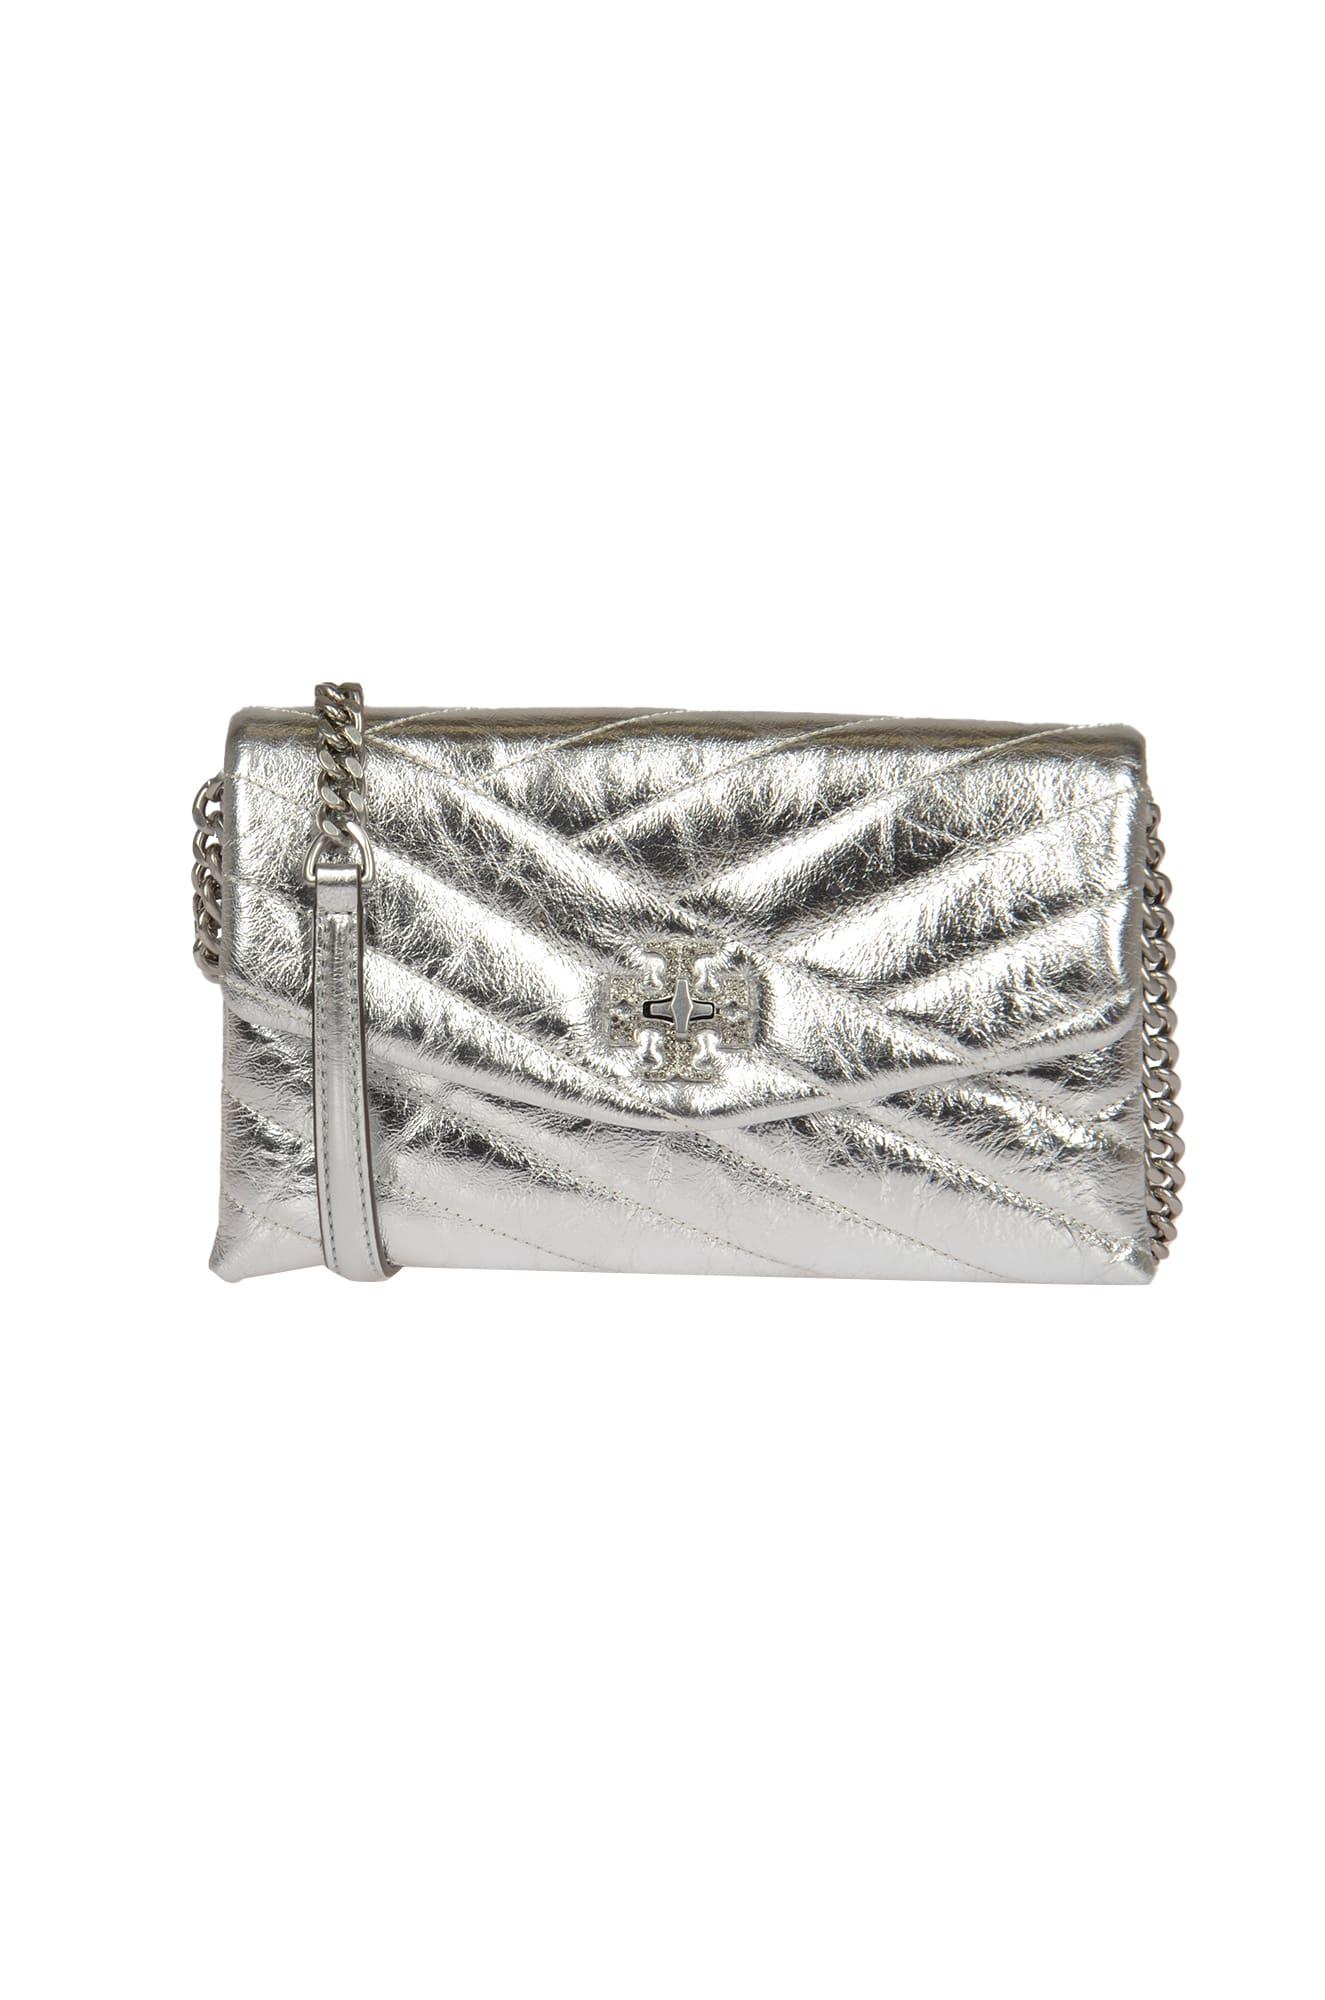 Tory Burch Chain Strap Shoulder Bag in White | Lyst